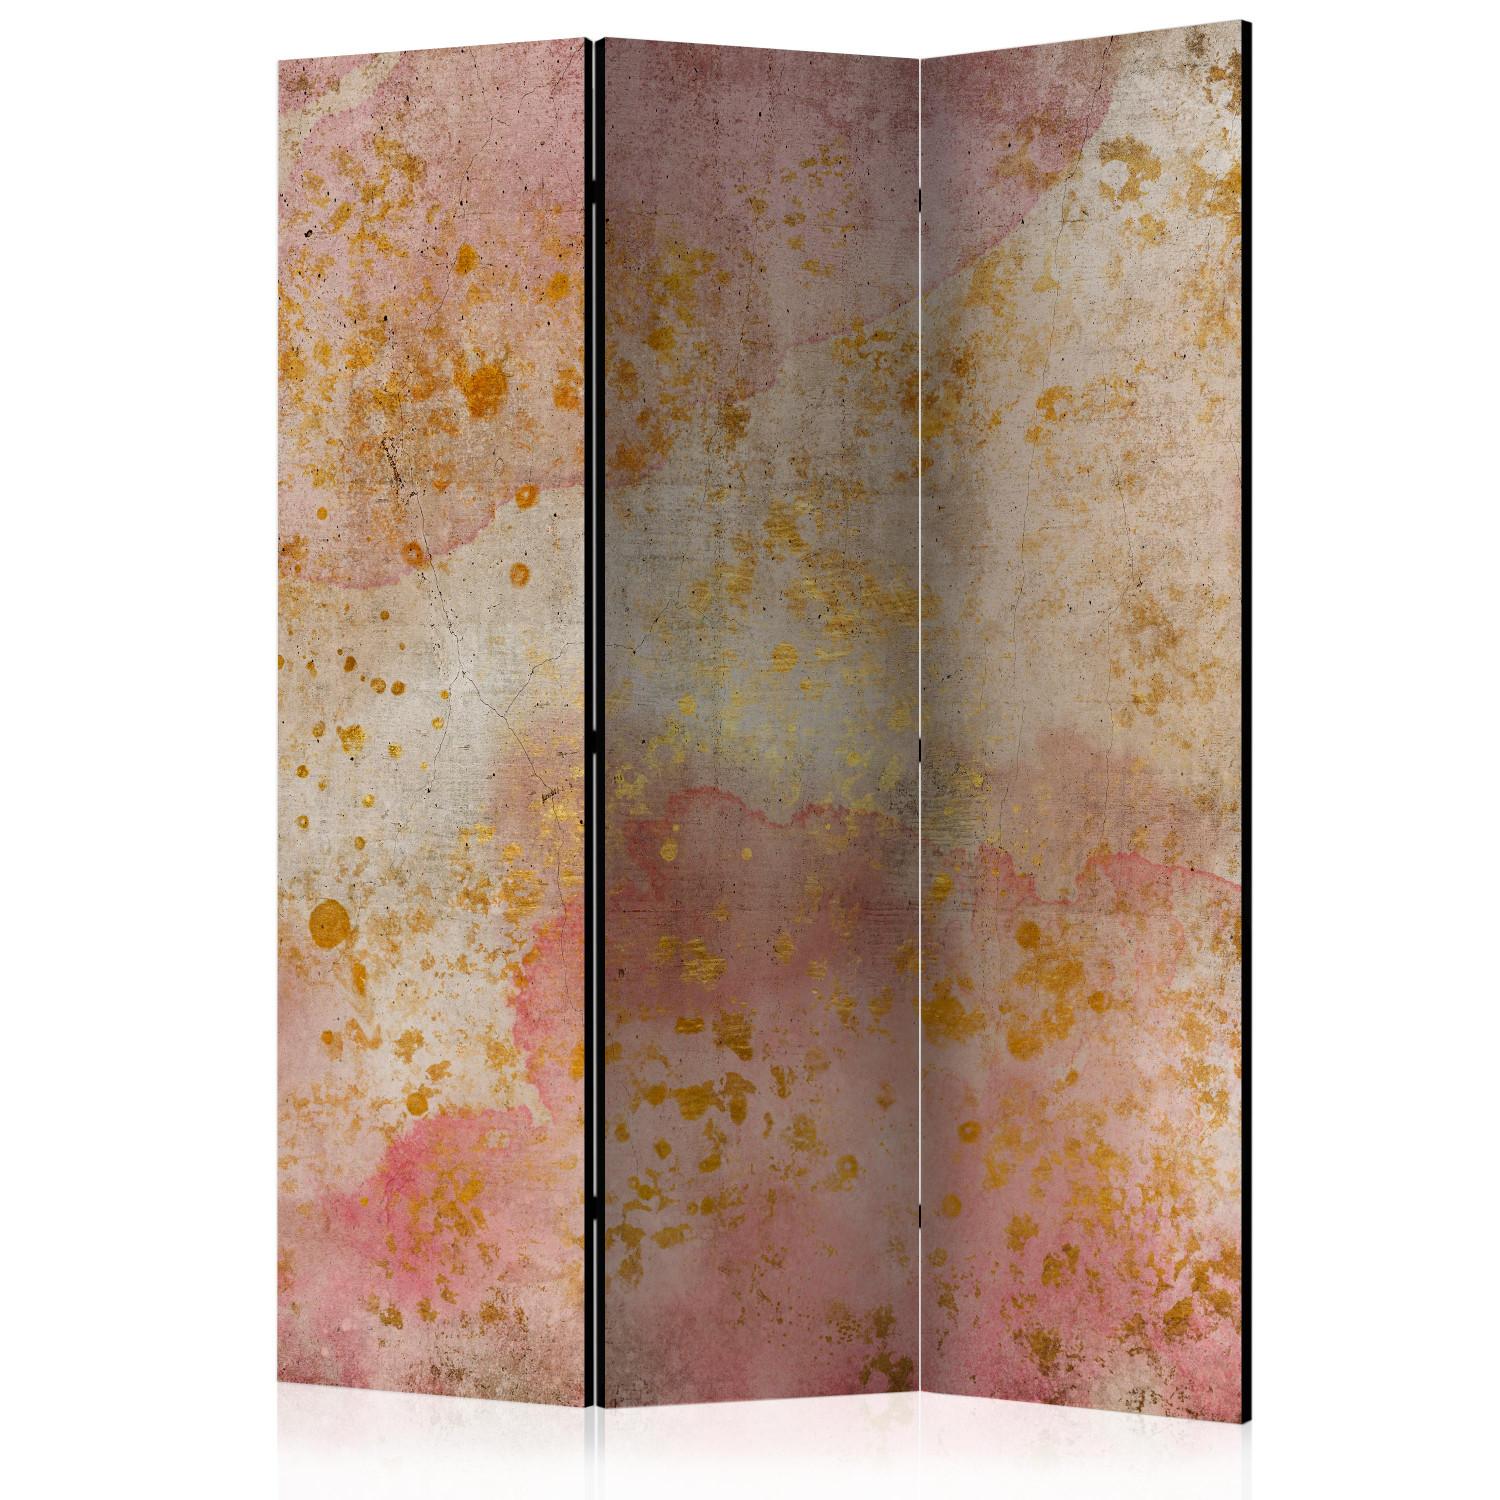 Room Divider Golden Bubbles (3-piece) - Watercolor abstraction on concrete background